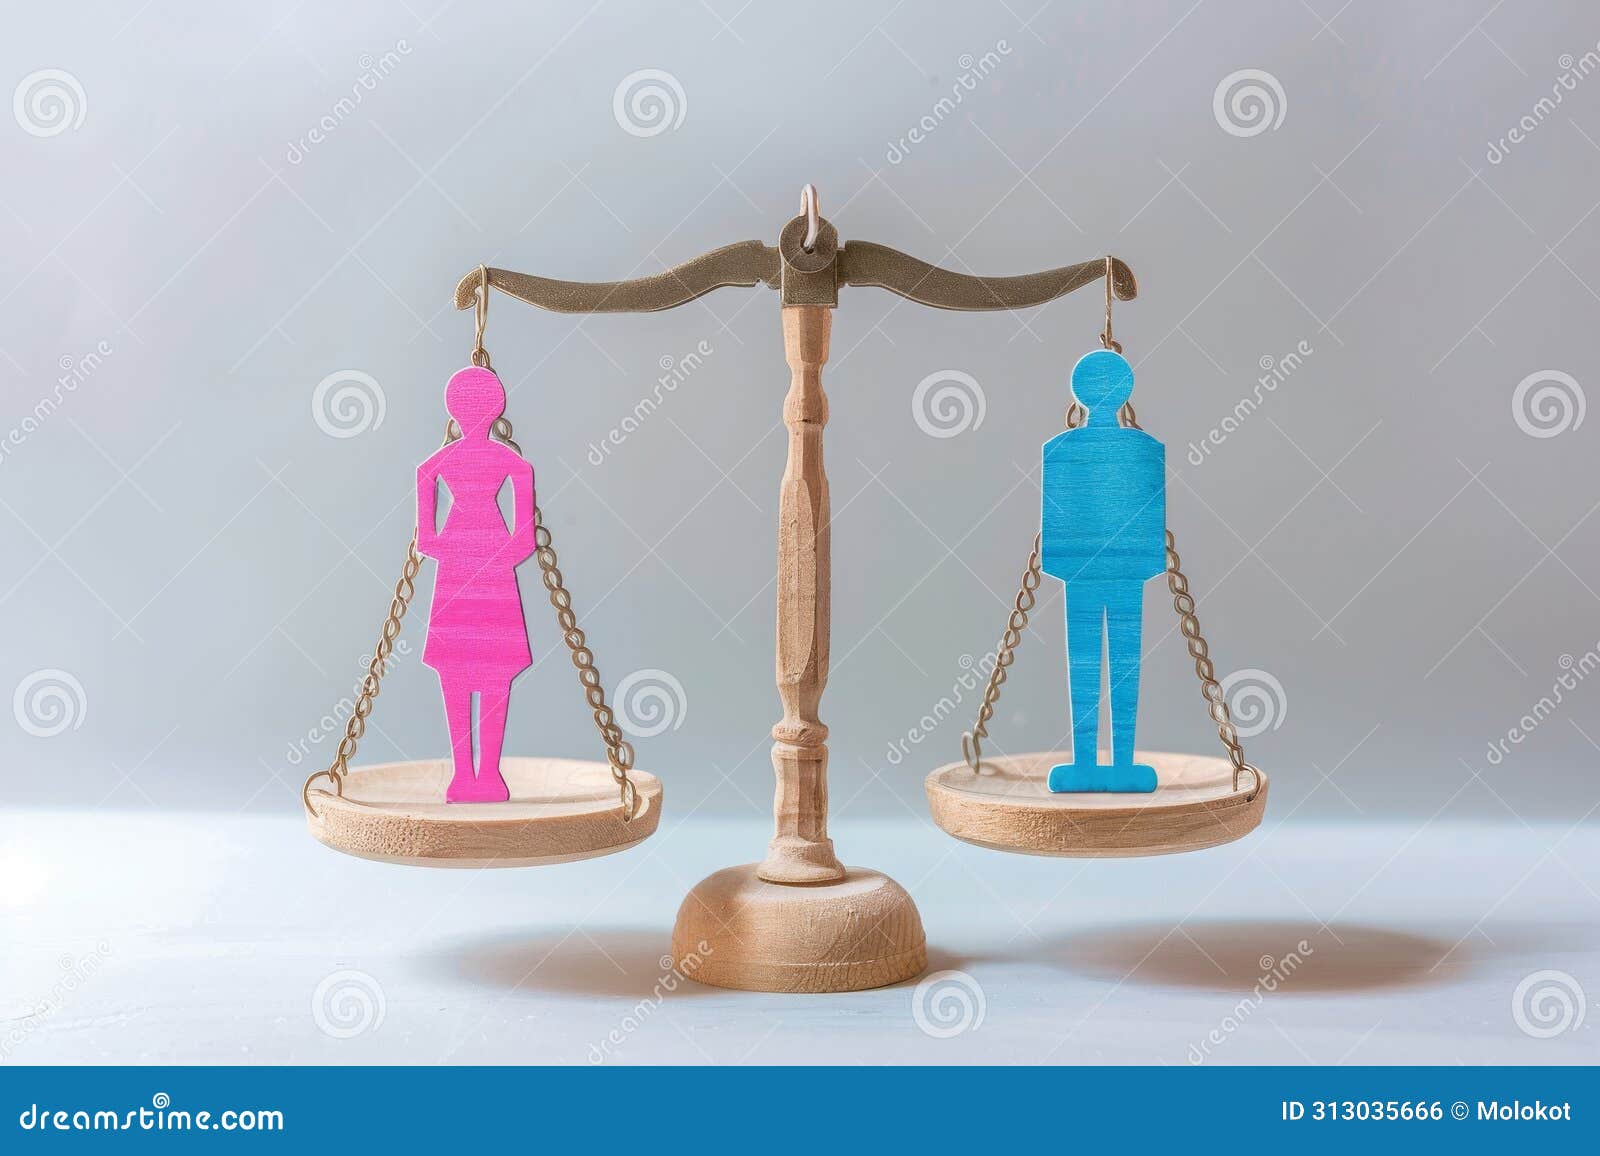 concept of gender equality. scales with pink female figure and blue male figure. equivalence, equal rights, gender equality,